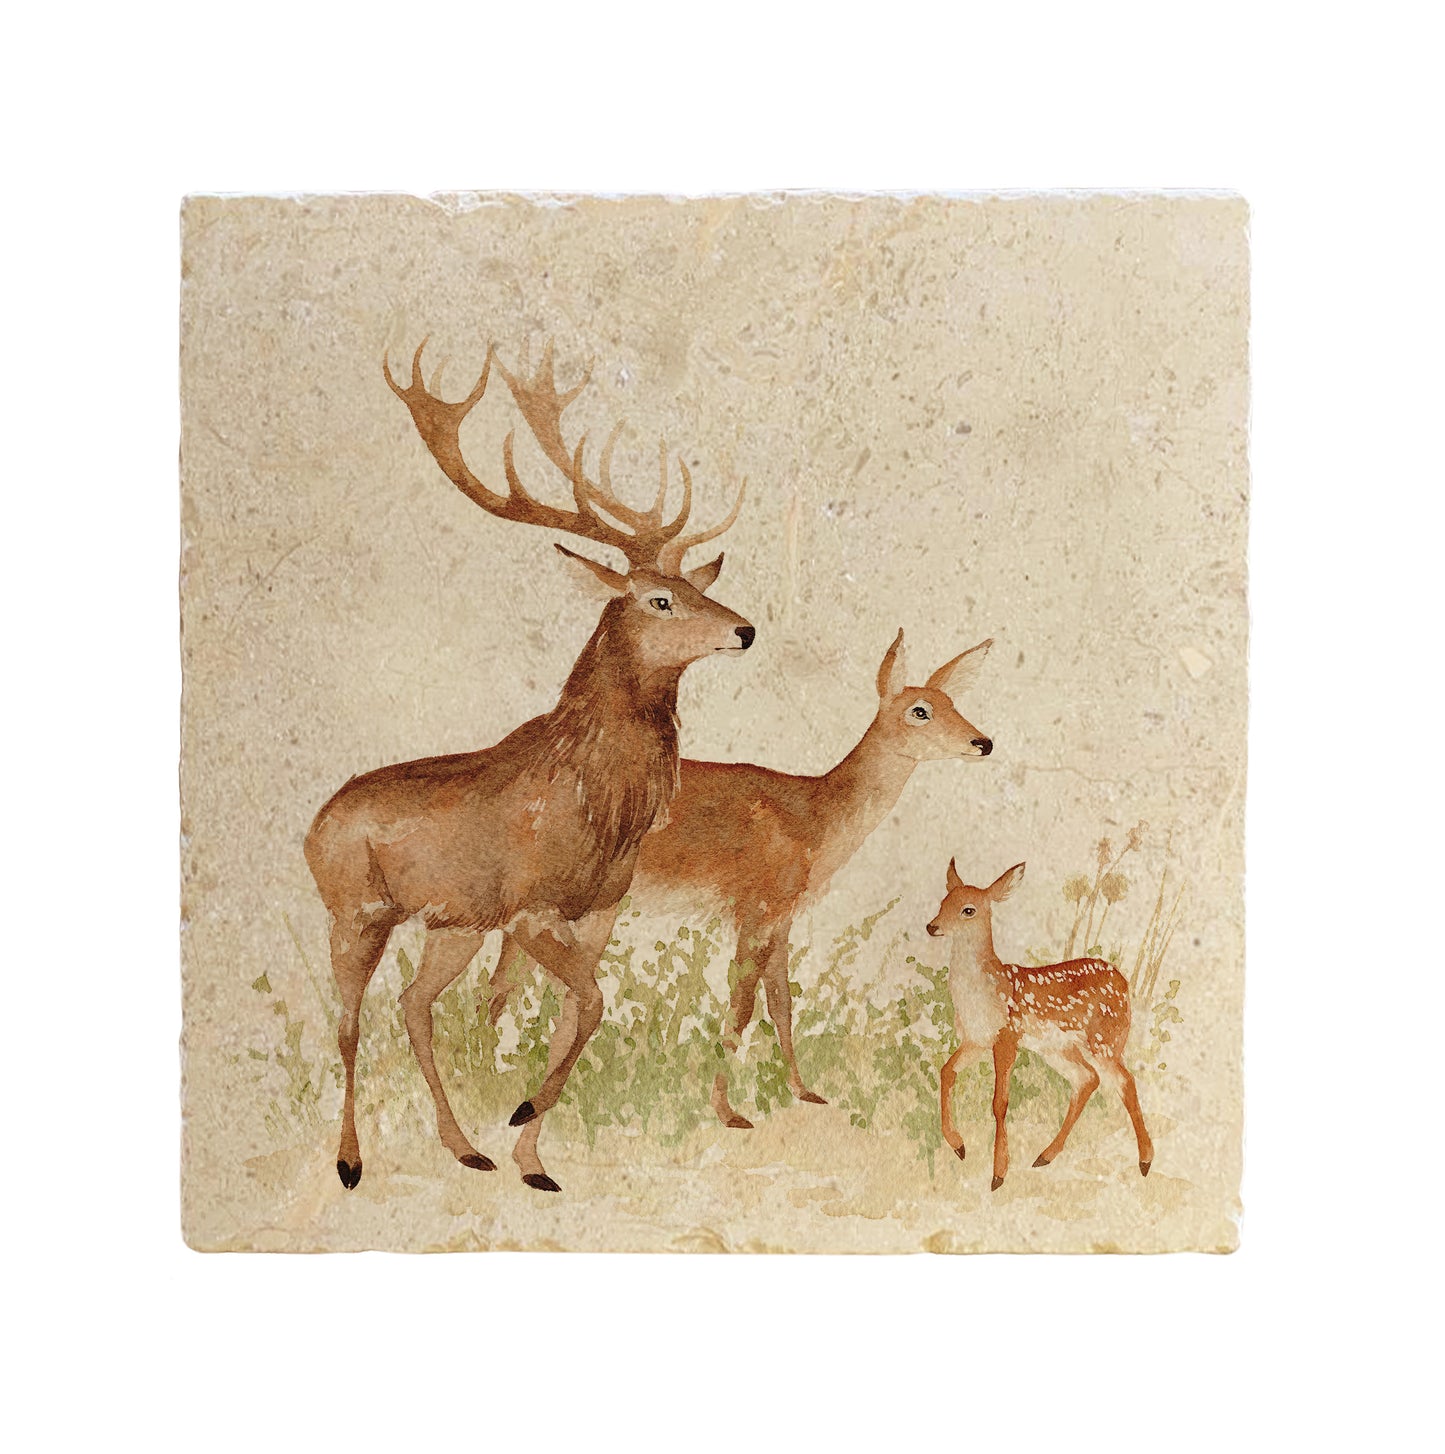 A large square marble platter or worktop saver, featuring a watercolour design of a red deer family. The family includes a stag, hind and fawn.